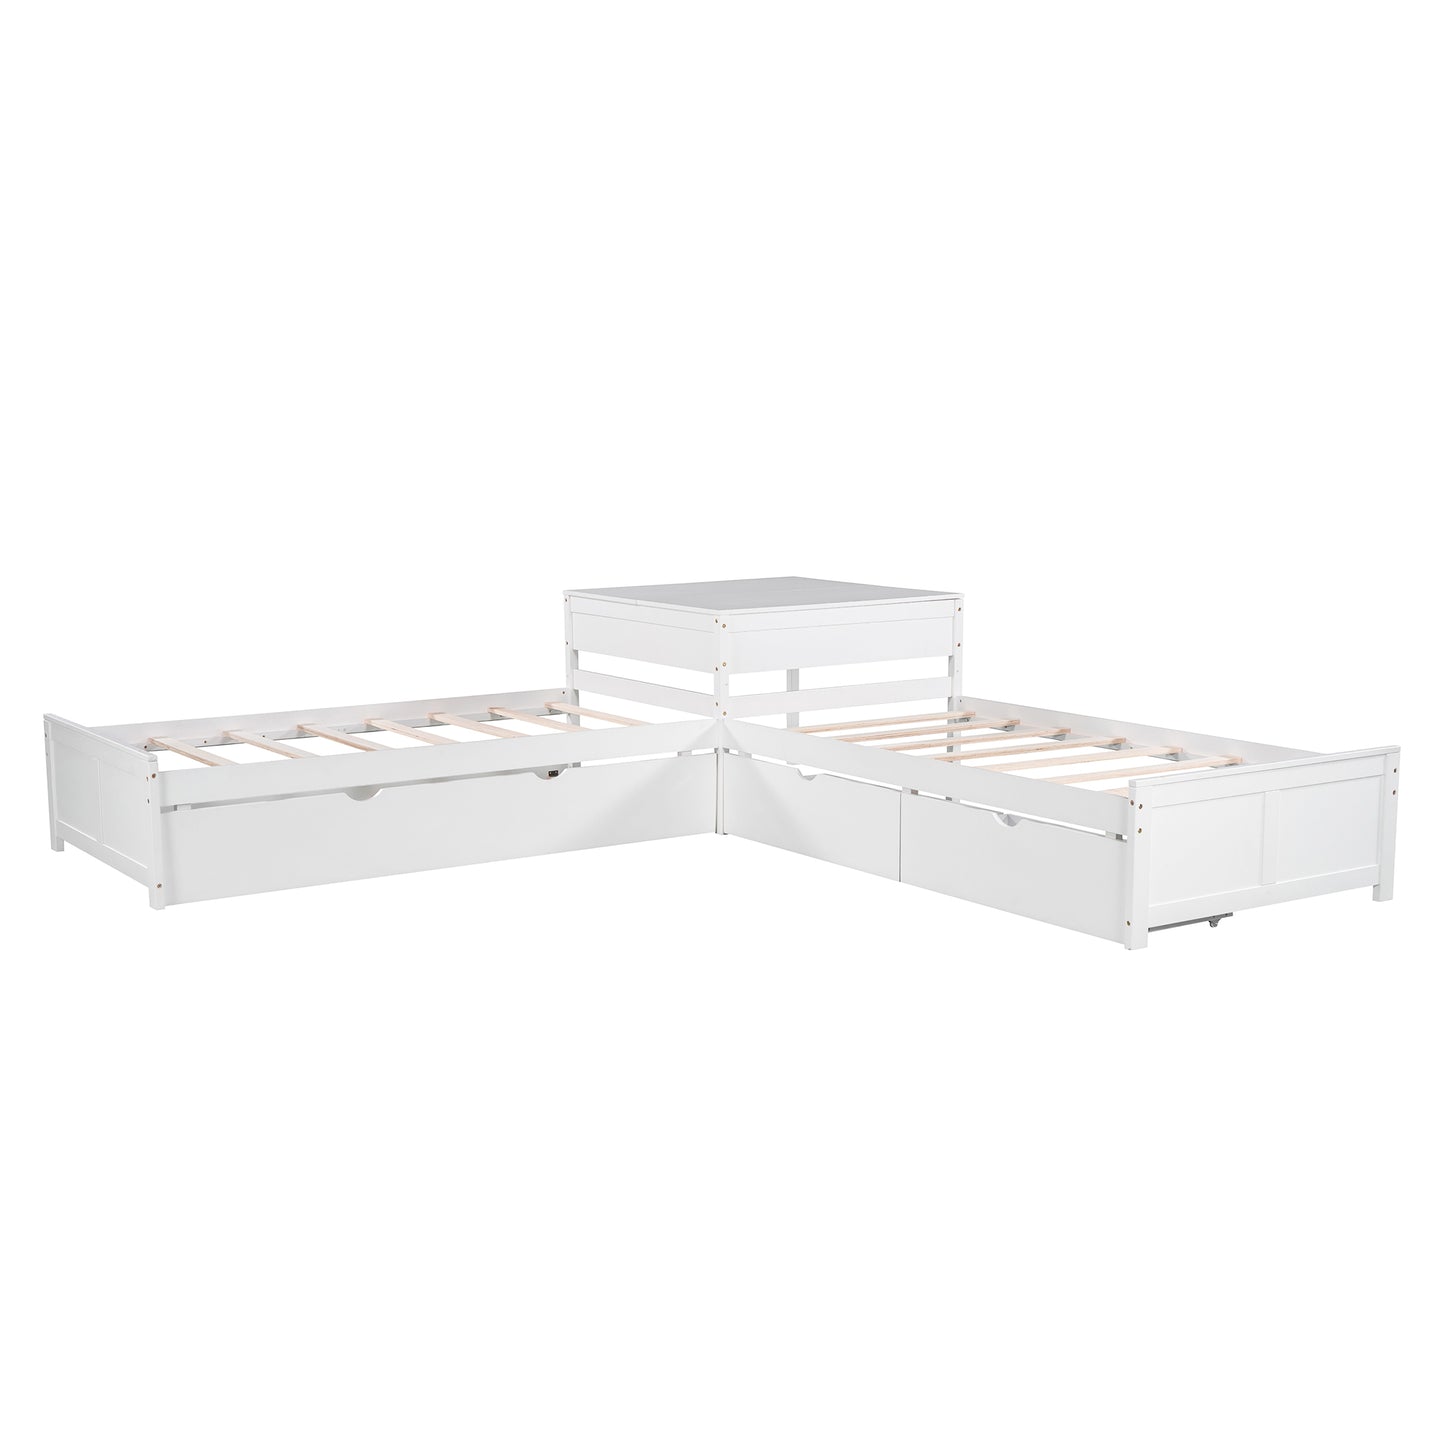 L-shaped Platform Bed with Trundle and Drawers Linked with built-in Desk,Twin,White